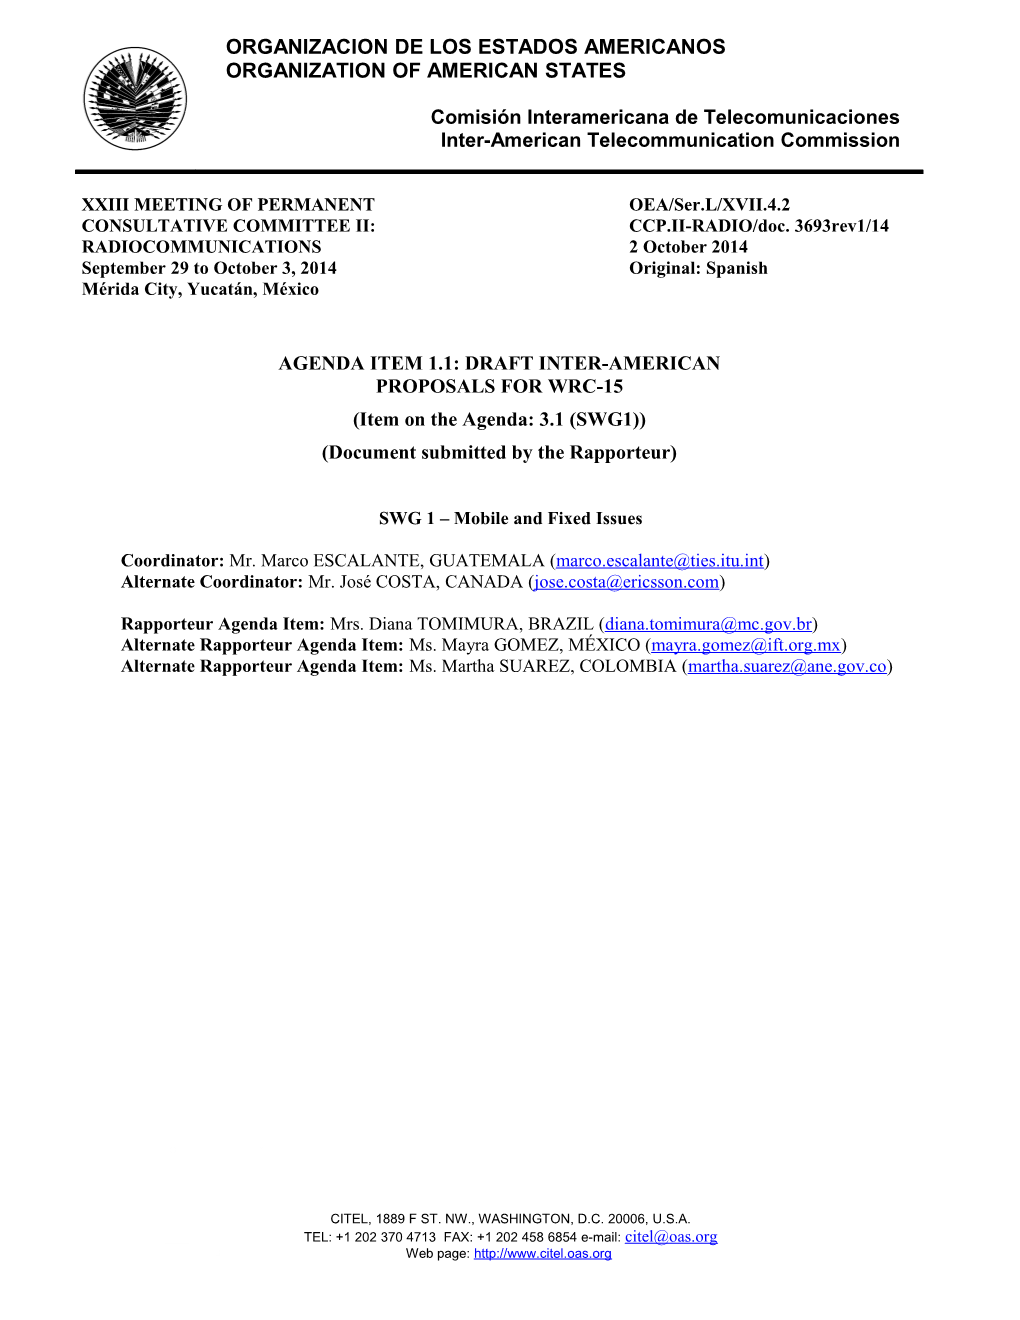 AGENDA ITEM 1.1: DRAFT INTER-AMERICAN PROPOSALS for WRC-15. (Document Submitted by The